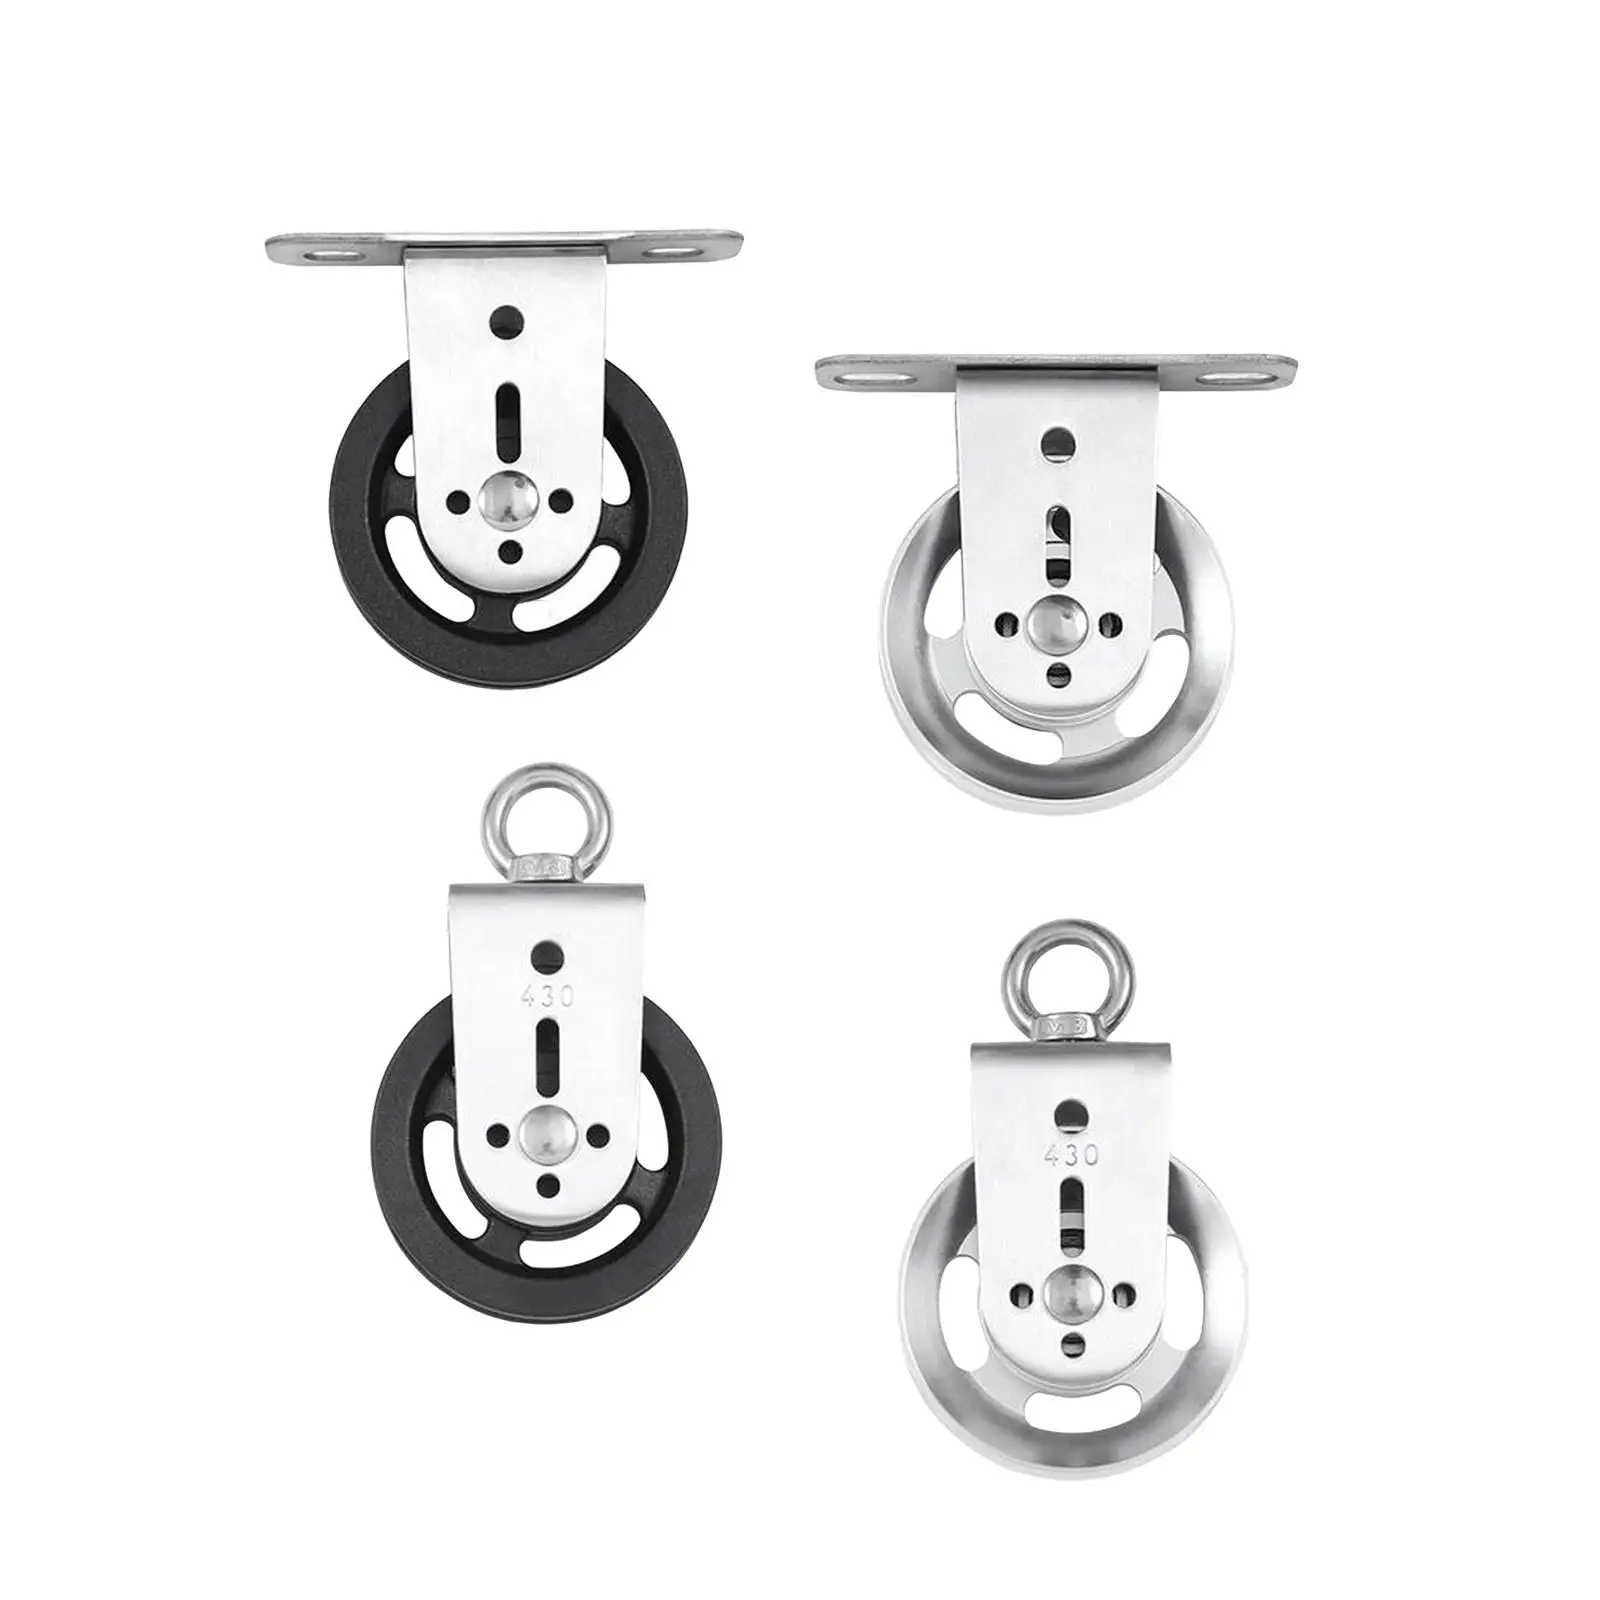 Pulley Wheel Portable Stainless Steel Lifting Pulley for Crane Traction Home